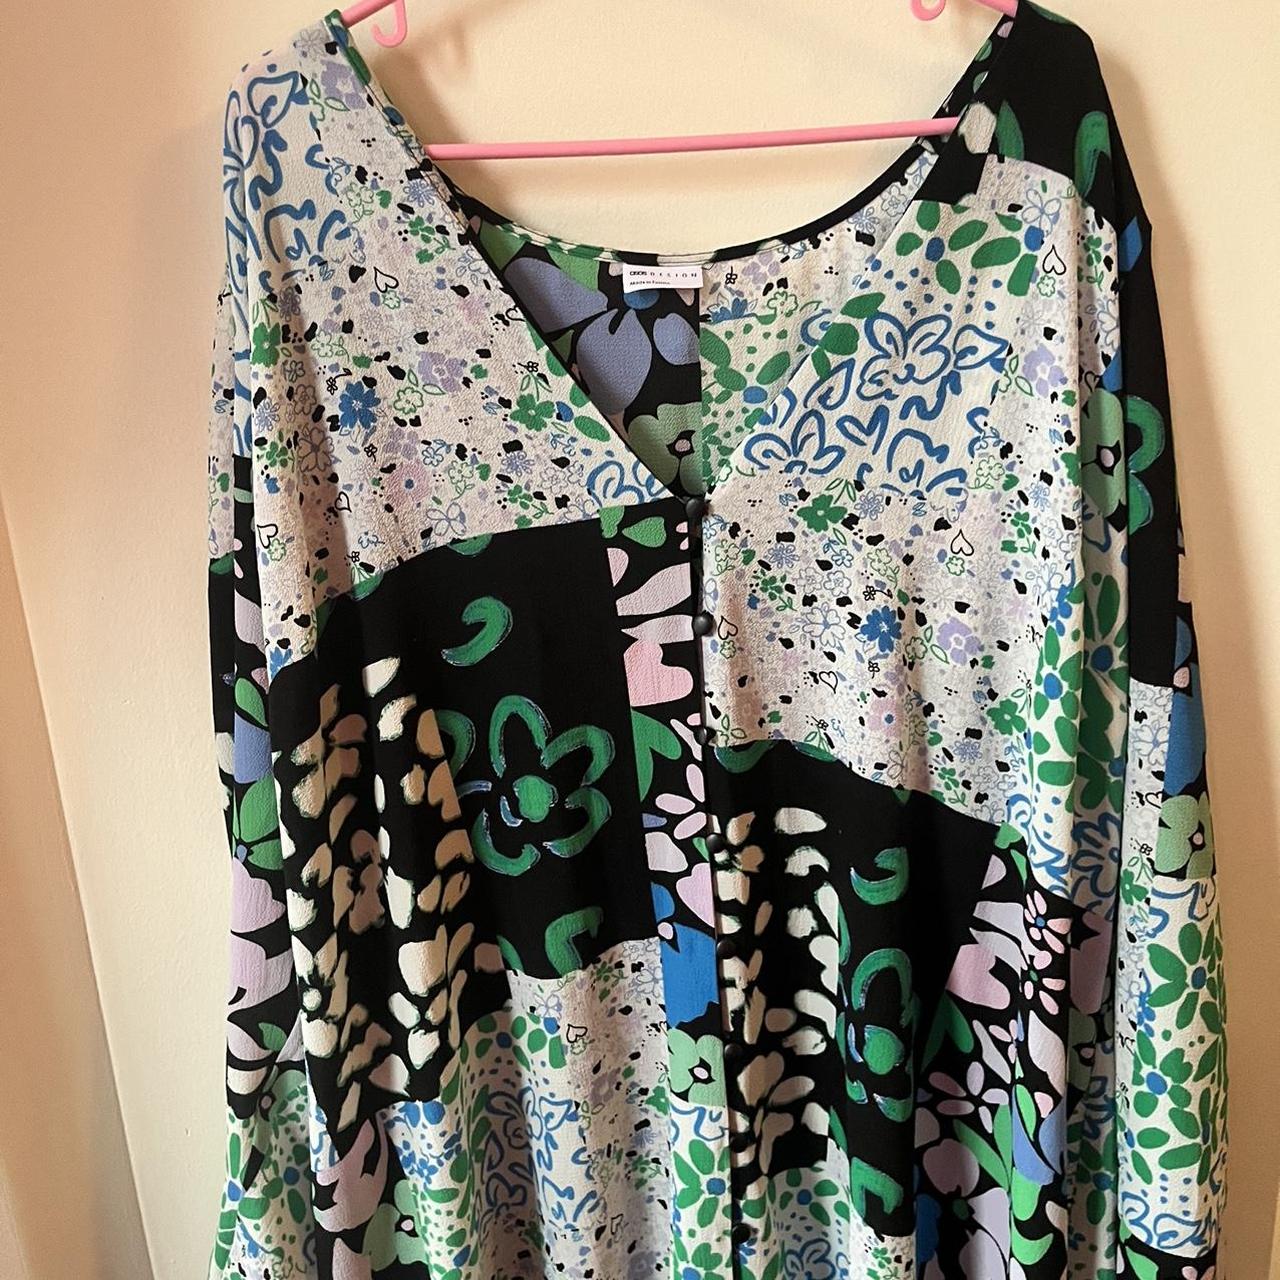 Plus size dress, worn only once to try on, just a... - Depop